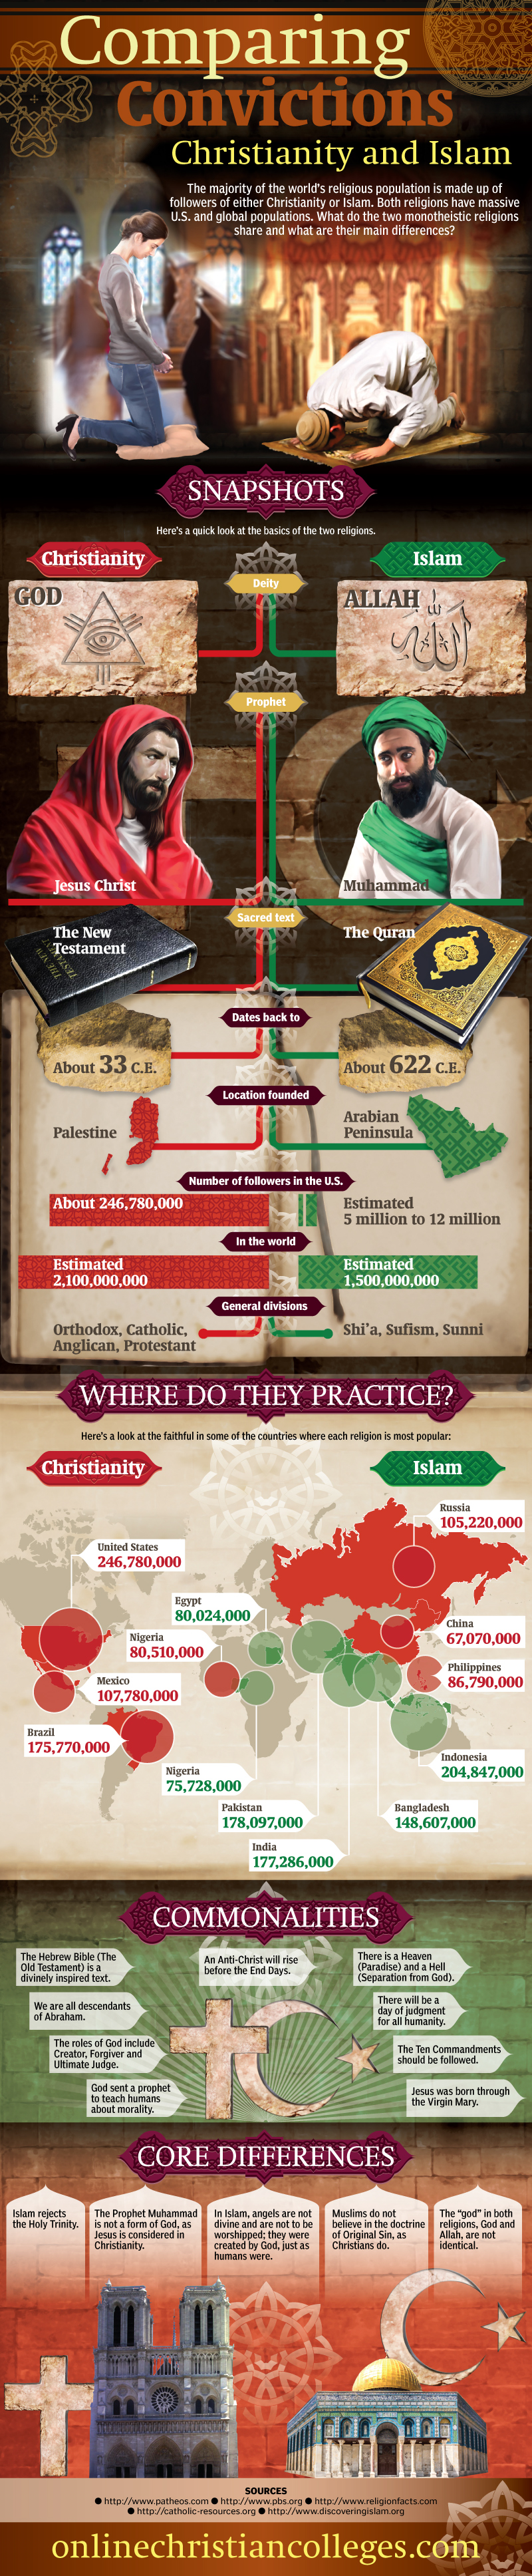 Christianity-compared-to-Islam